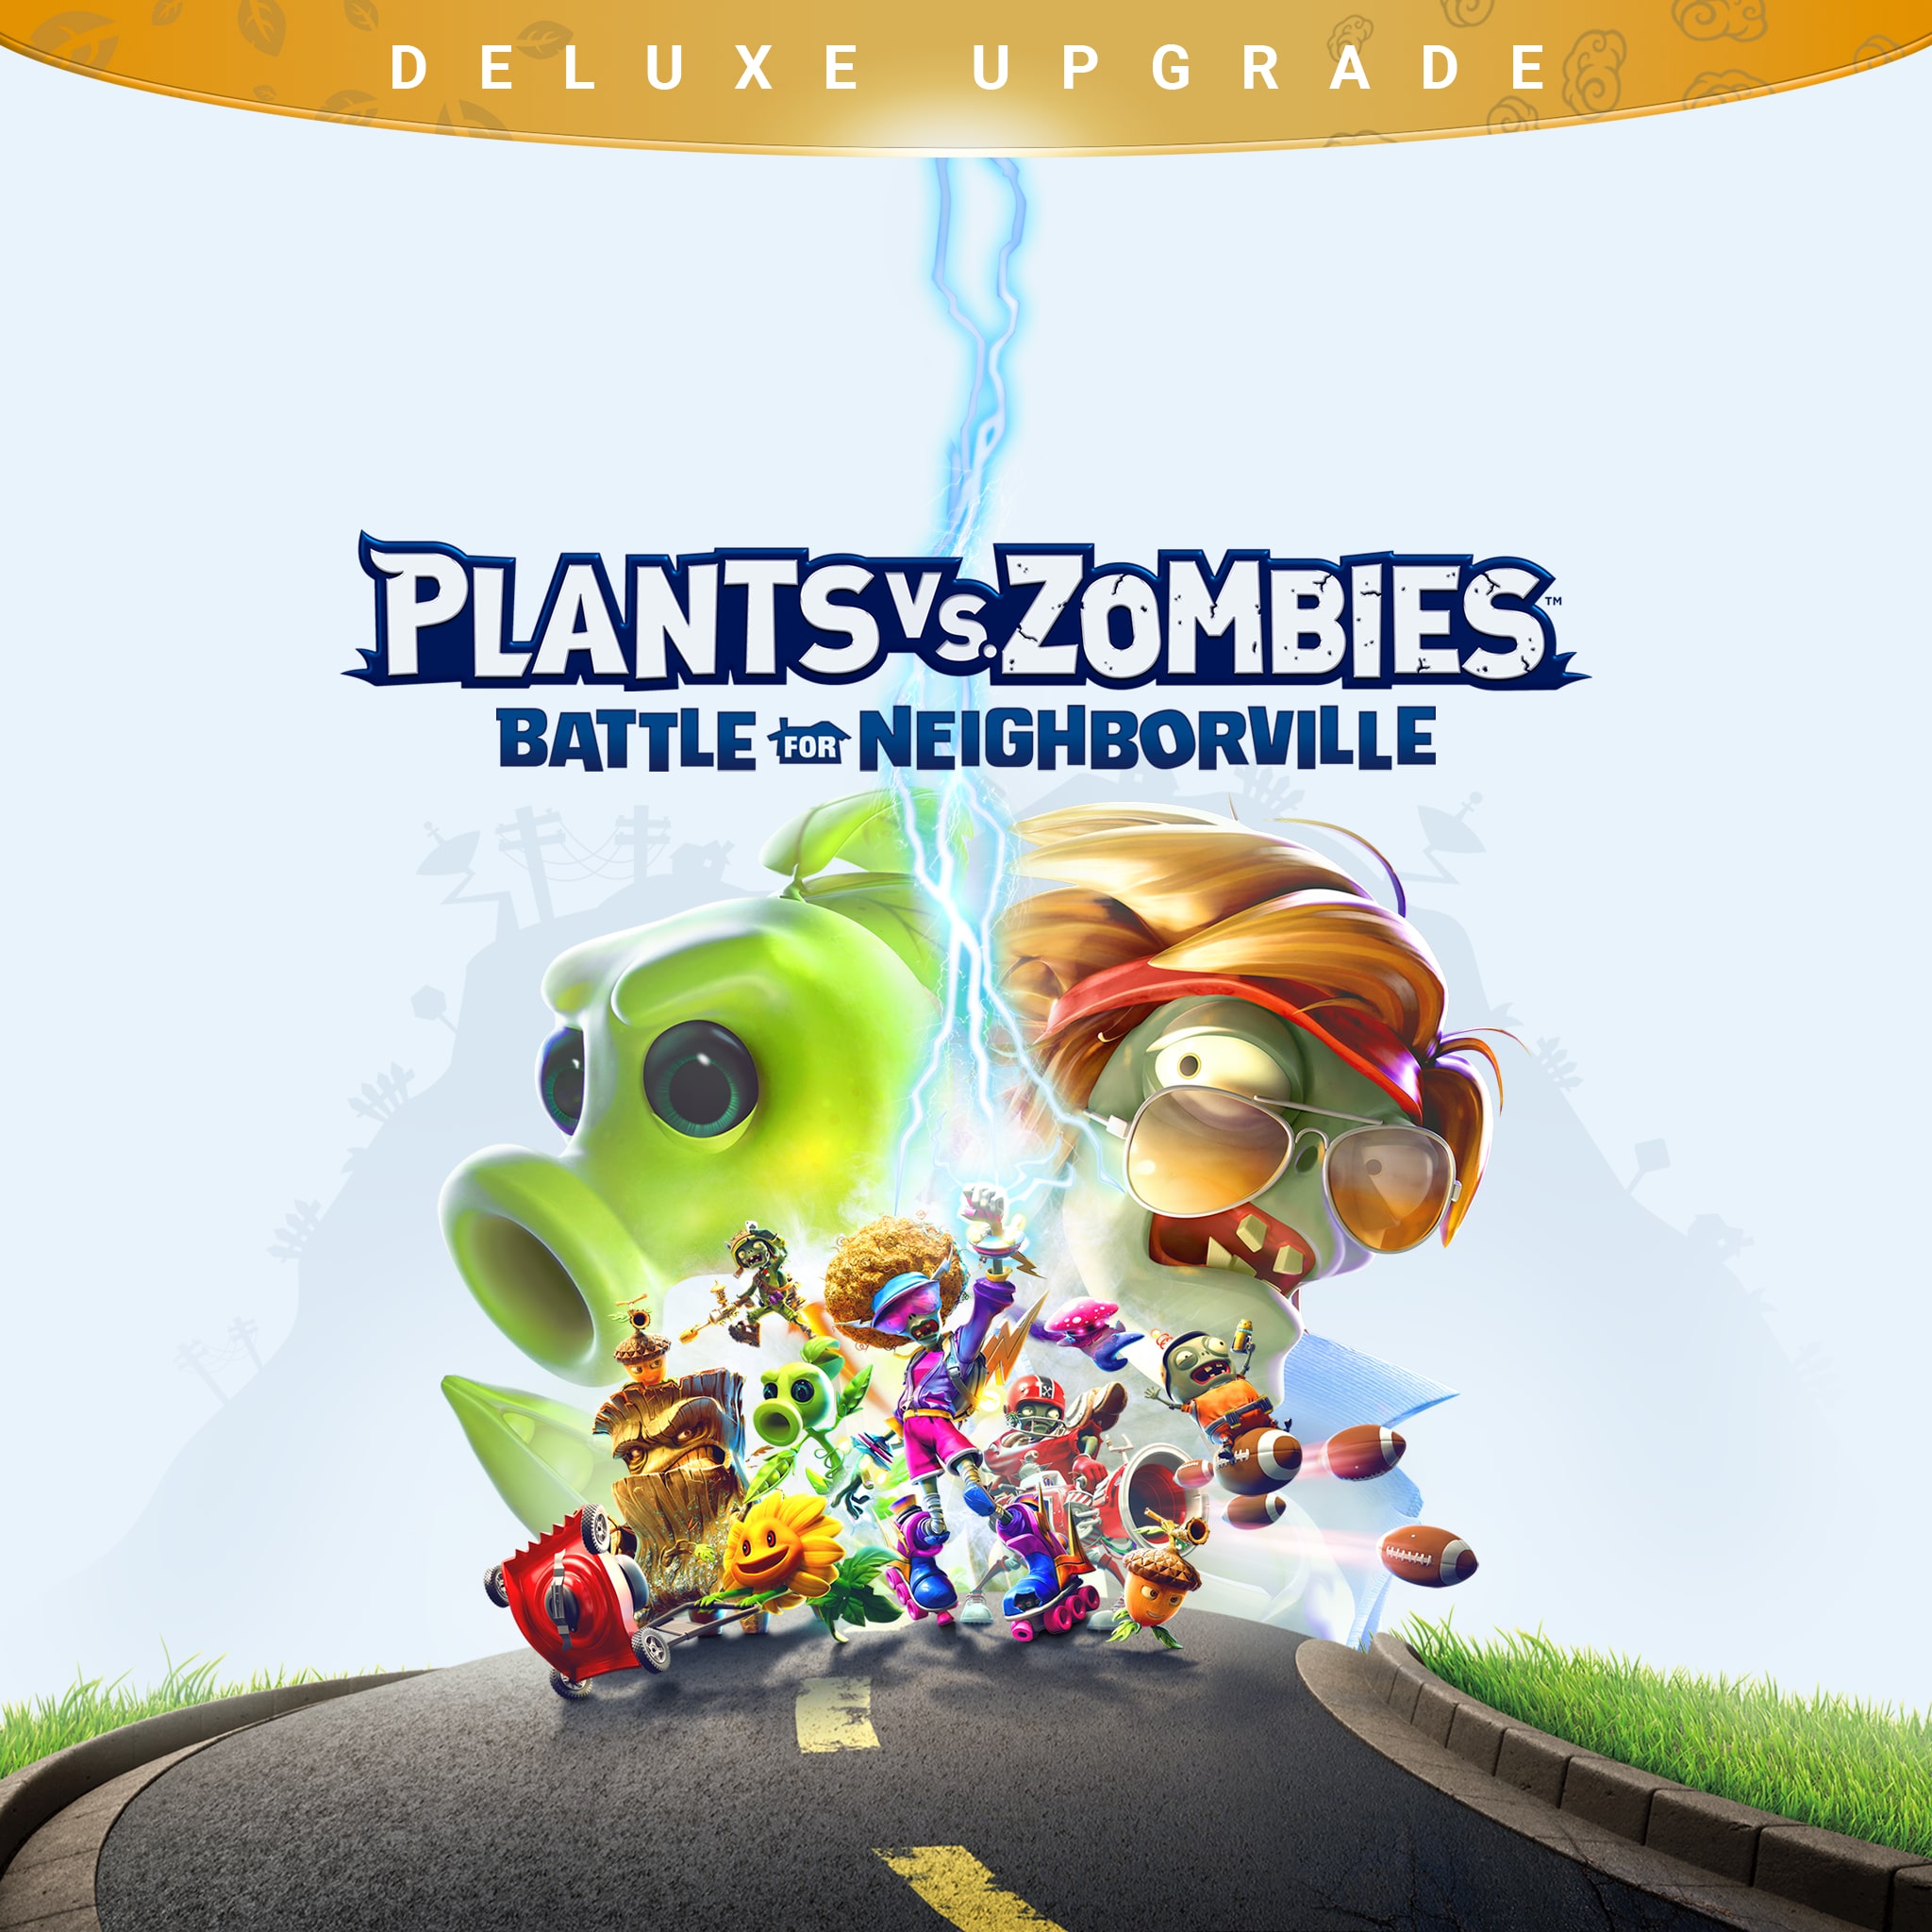 Plants vs. Zombies: Battle for Neighborville™ Complete Edition for